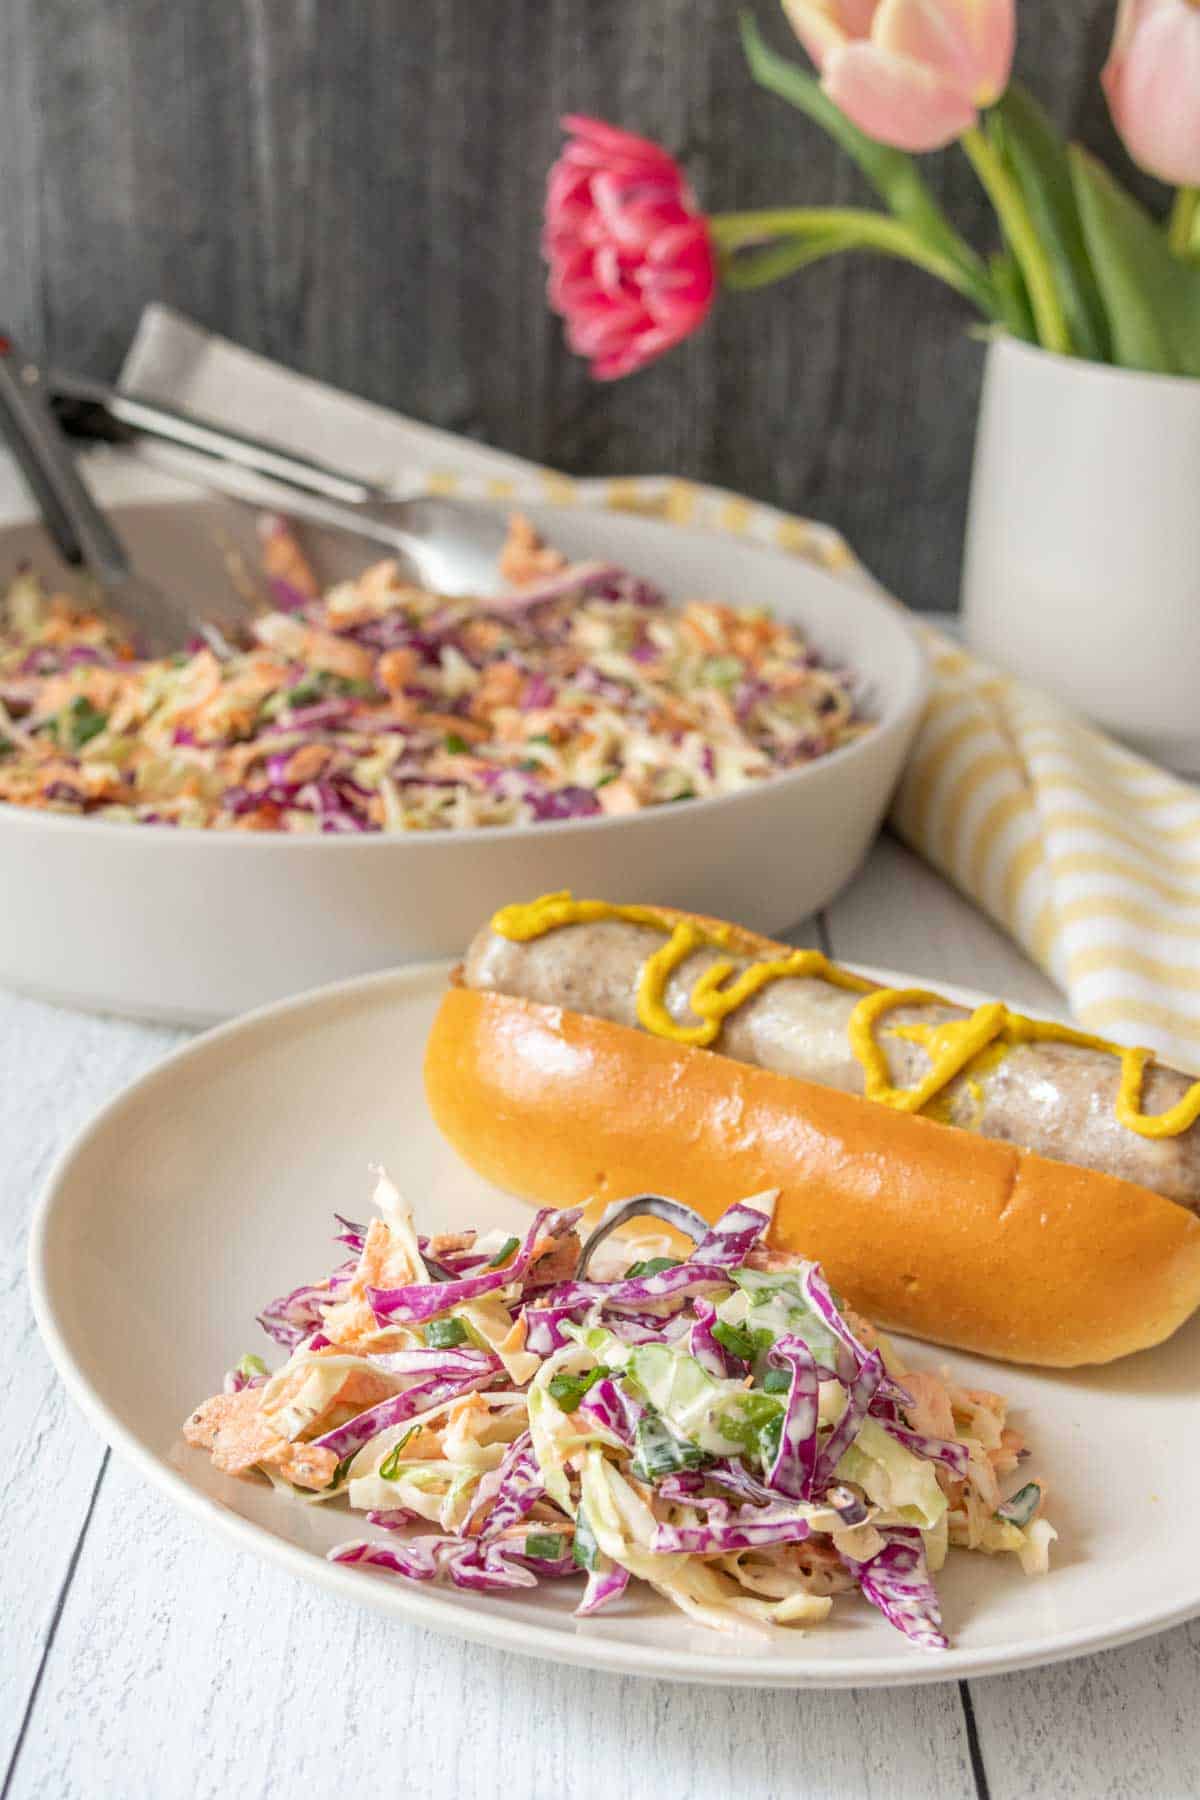 Cream plate with homemade coleslaw and a sausage in a bun.